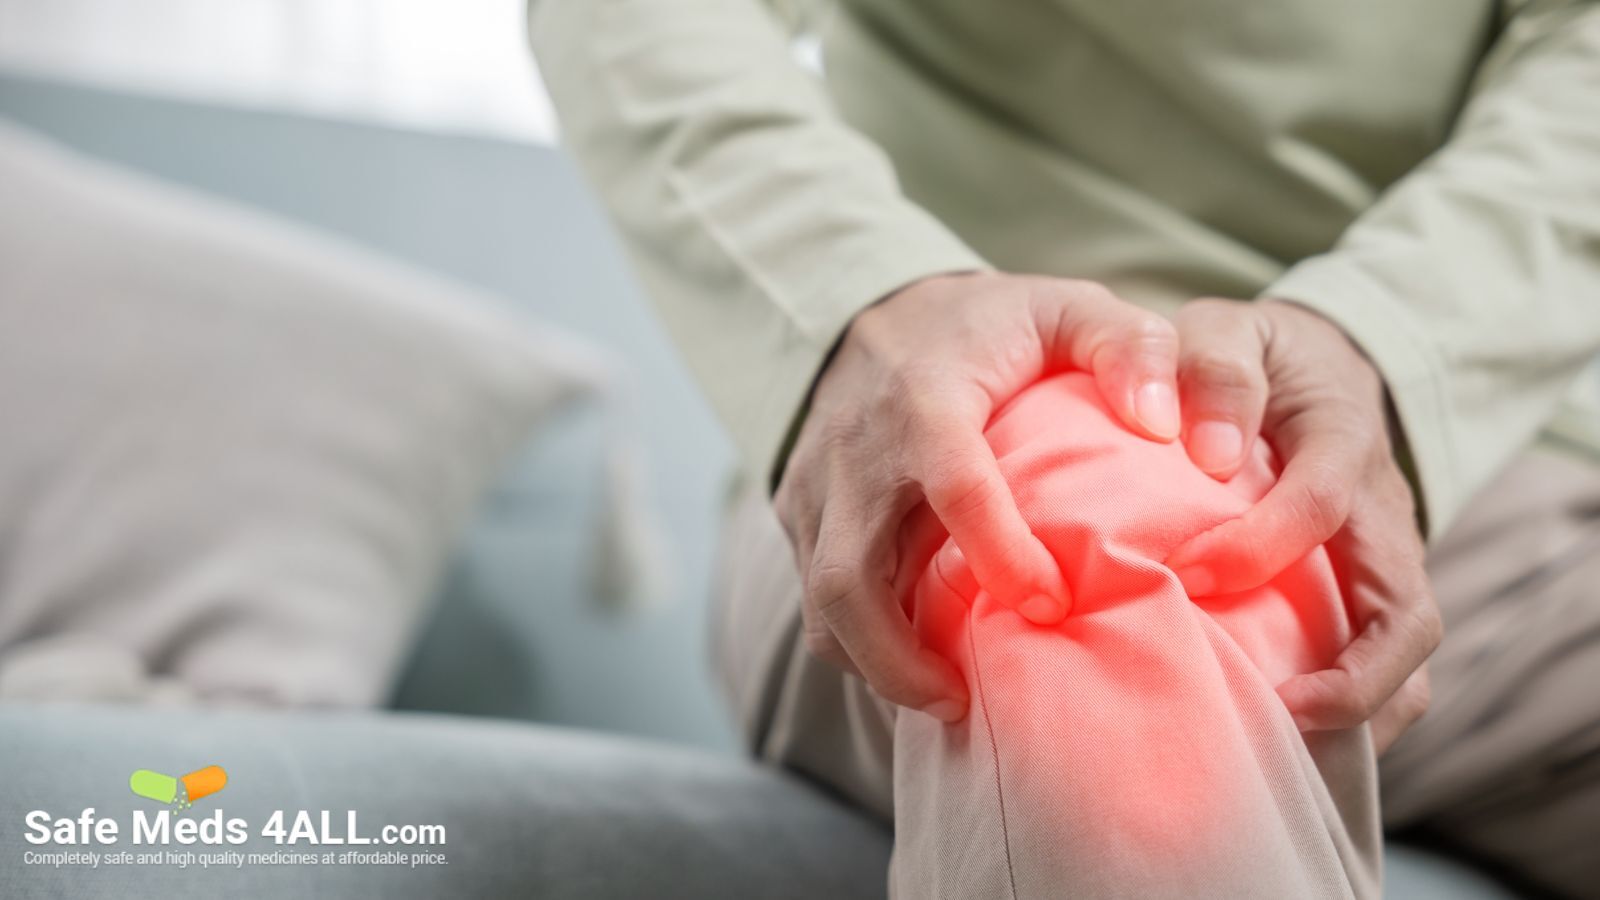 Managing Arthritis pain with medication and life style changes.